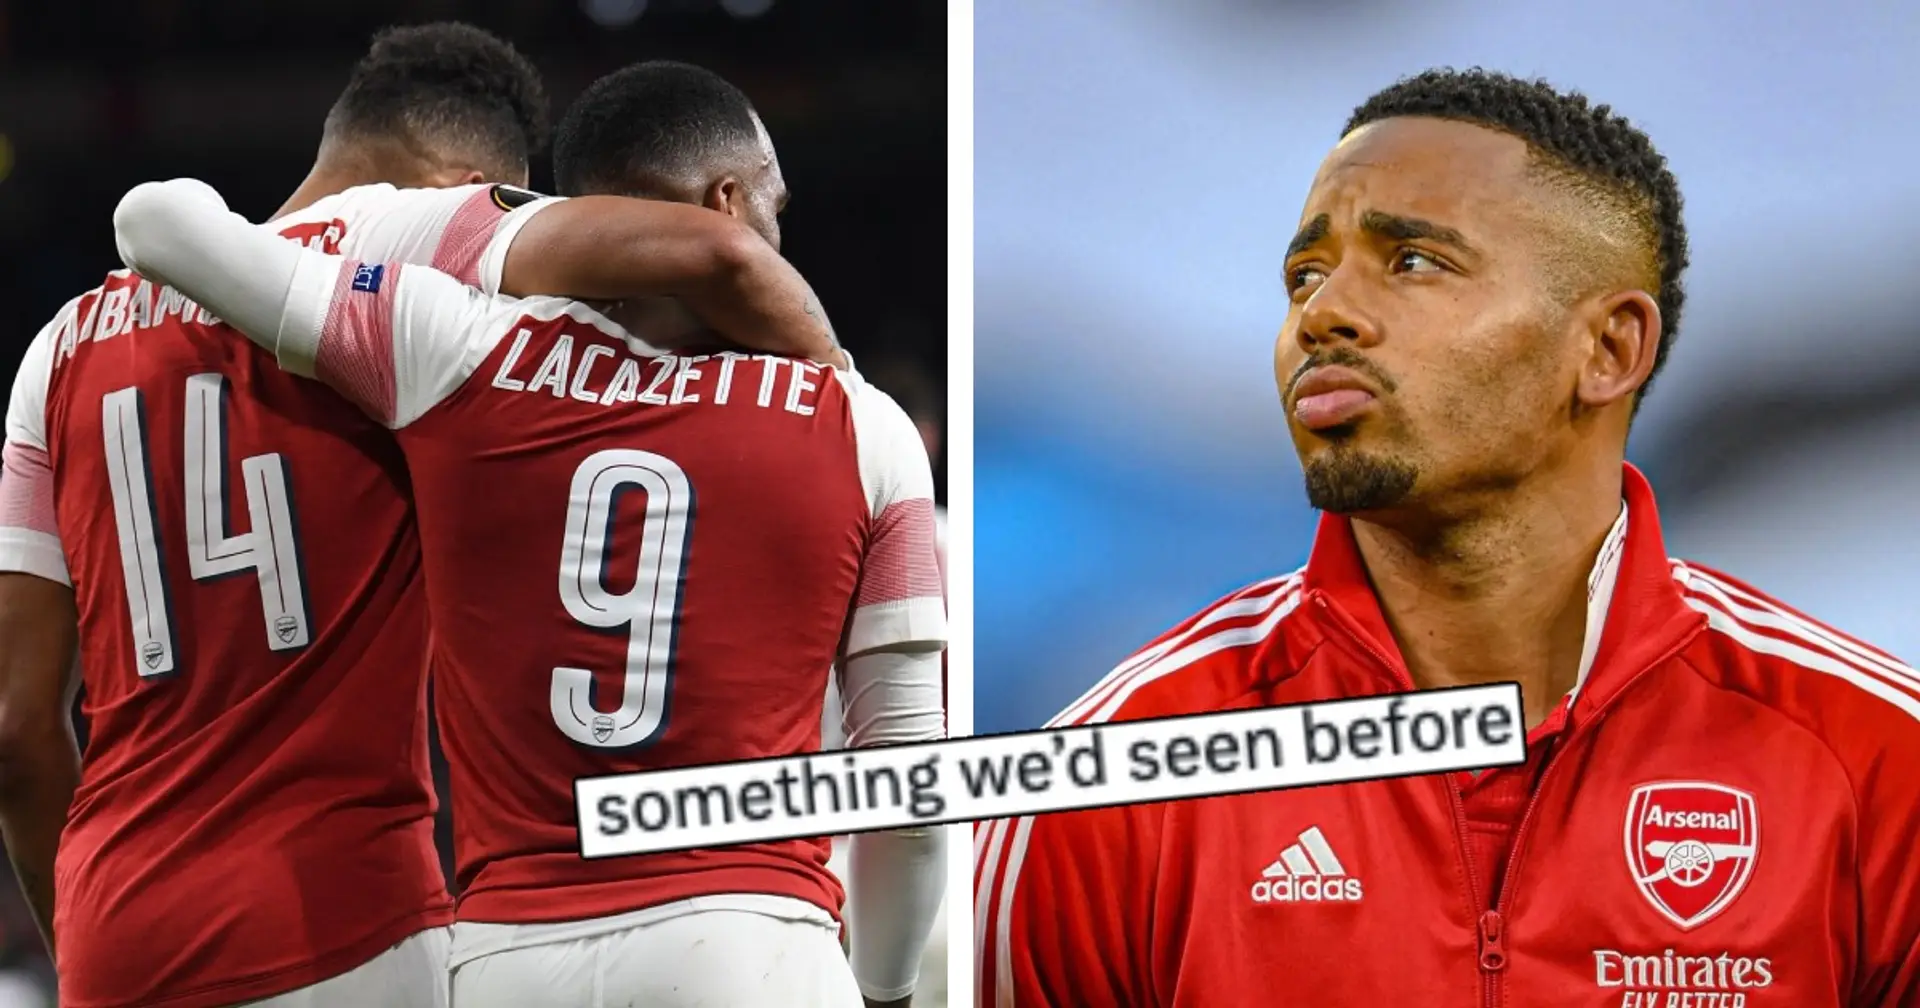 'He was Jesus with finishing': Arsenal fans missing ex-striker who has about 40 goals since he left 